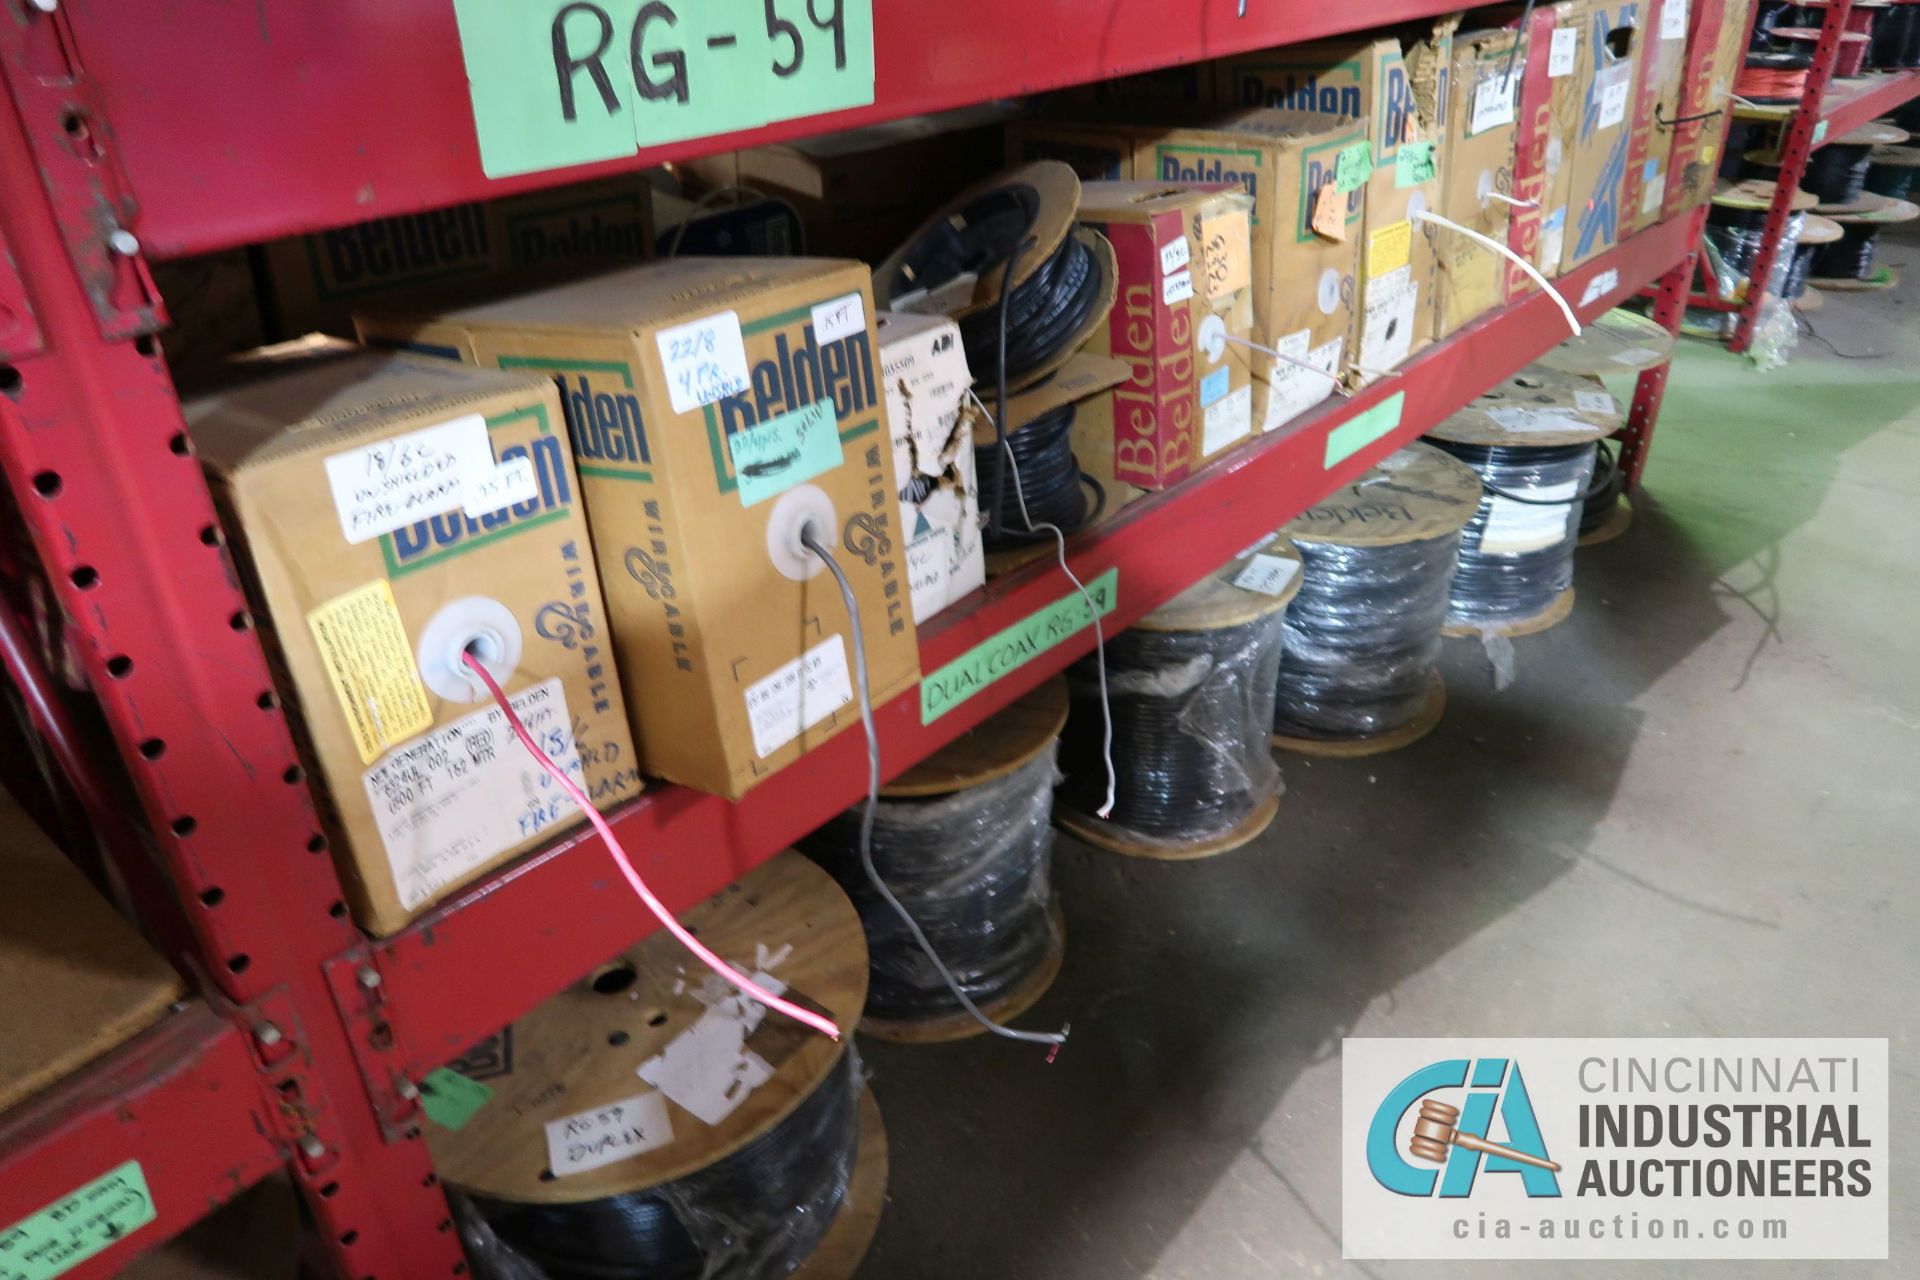 (LOT) LARGE QUANTITY OF COAX CABLE ON (3) SECTIONS RED RACK - MOSTLY BY BELDEN AND UNREEL - - Image 13 of 14